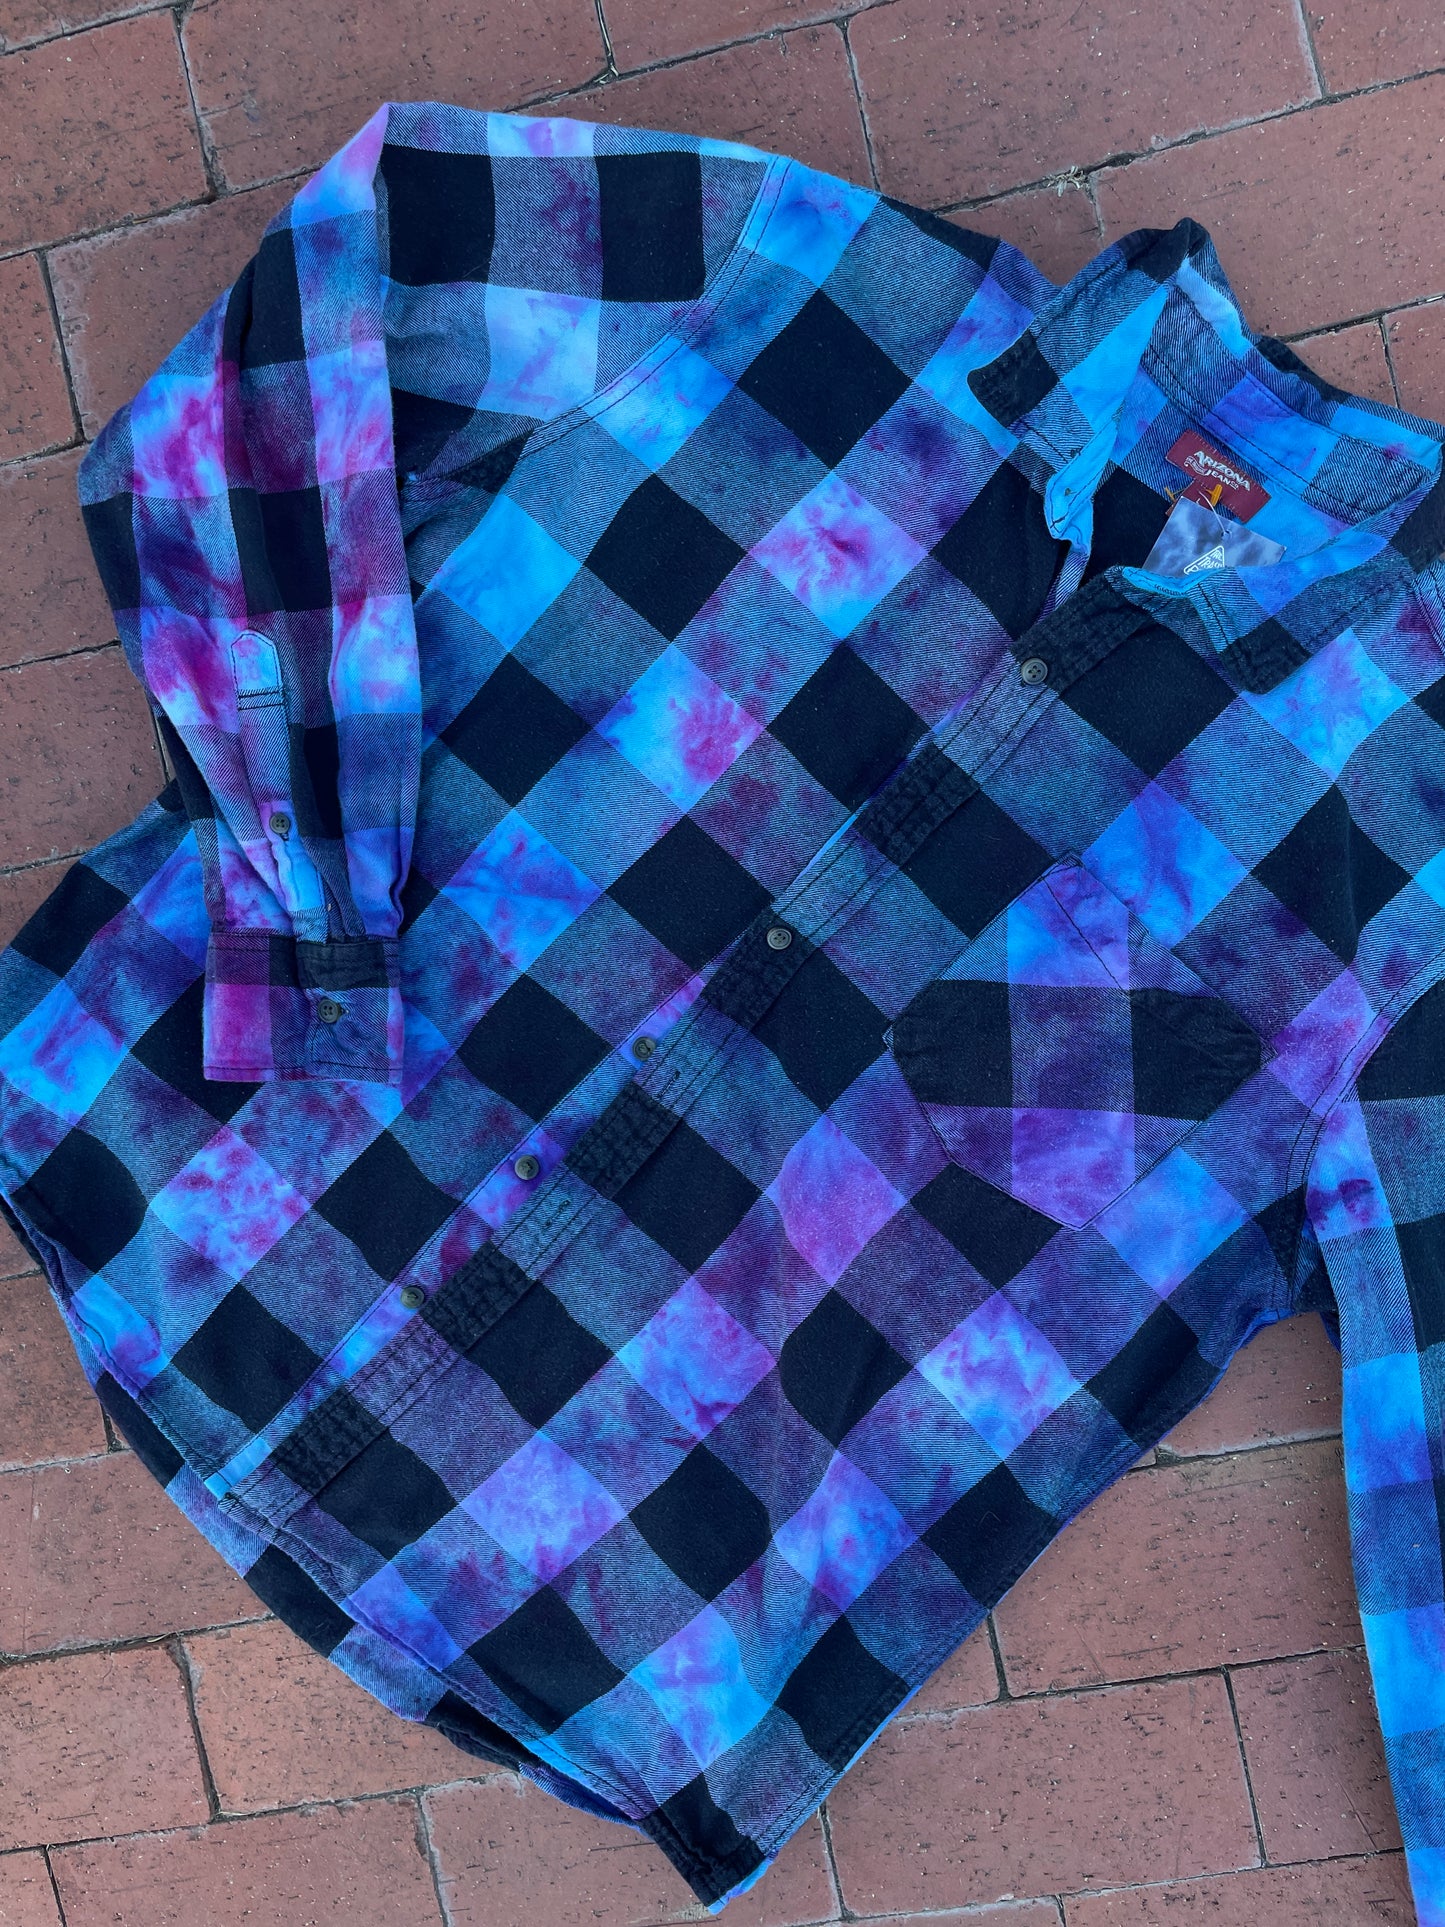 LARGE Women’s Galaxy Buffalo Plaid Handmade Tie Dye Flannel Shirt | One-Of-a-Kind Upcycled Blue and Purple Long Sleeve